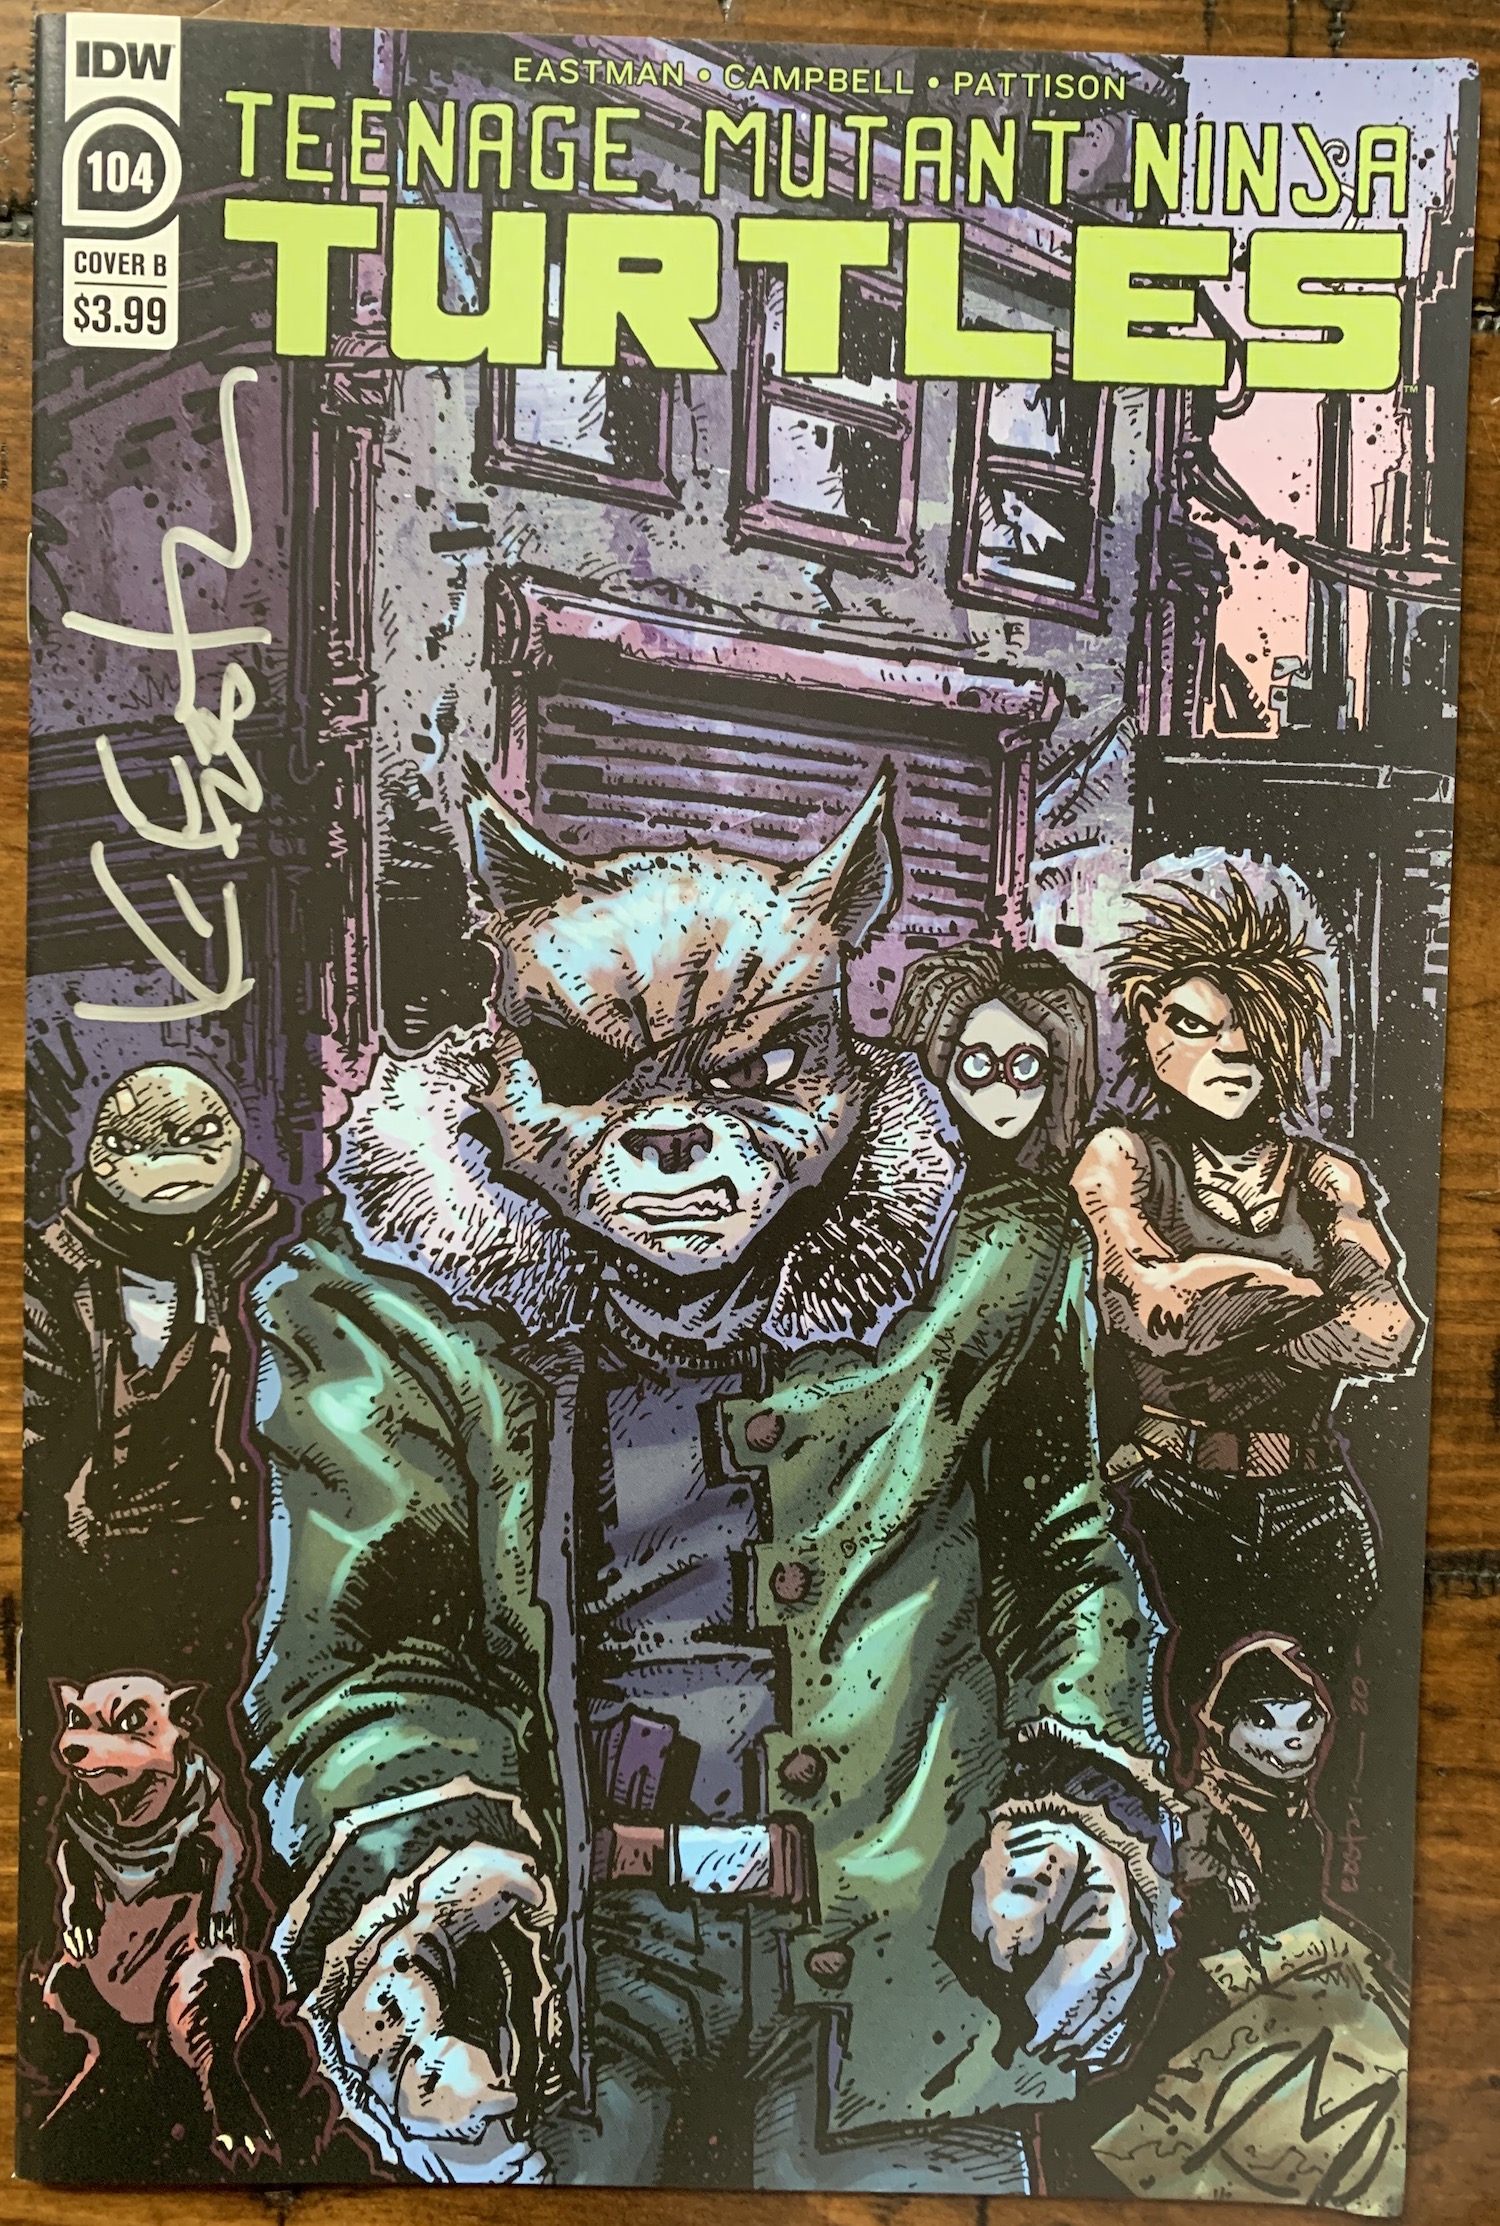 TMNT Issue 104 Eastman Cover B Variant Signed